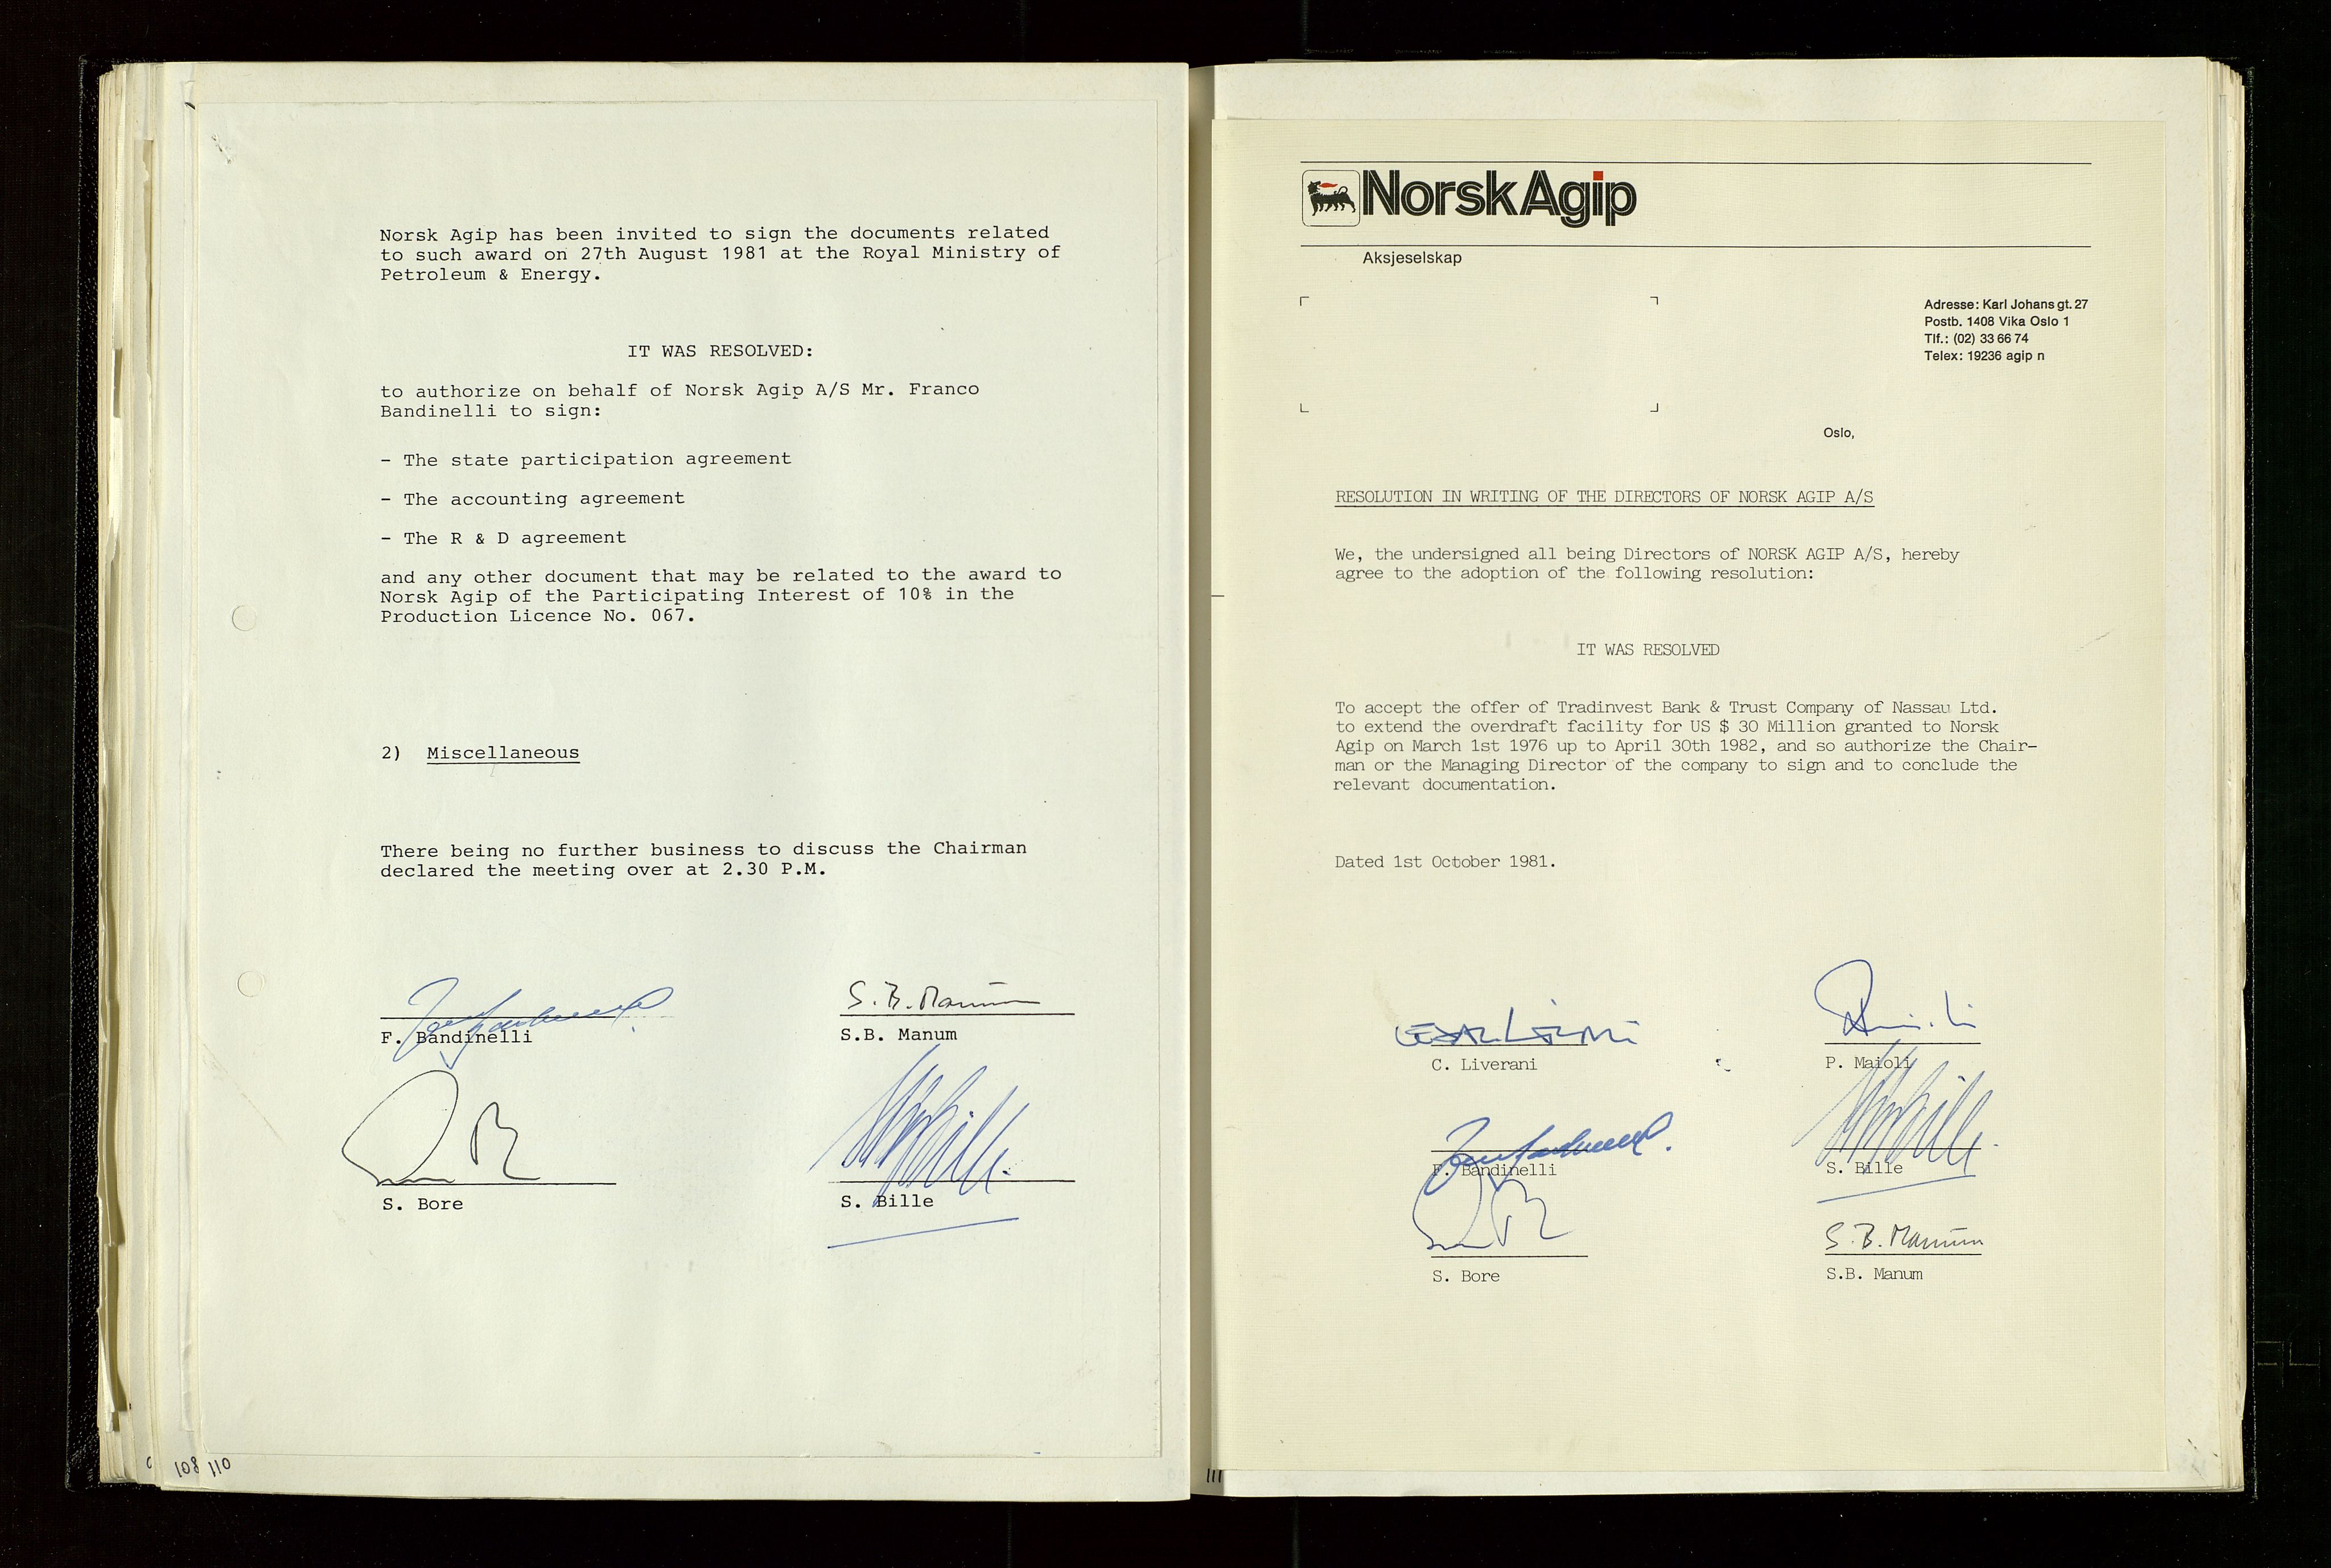 Pa 1583 - Norsk Agip AS, SAST/A-102138/A/Aa/L0003: Board of Directors meeting minutes, 1979-1983, p. 110-111